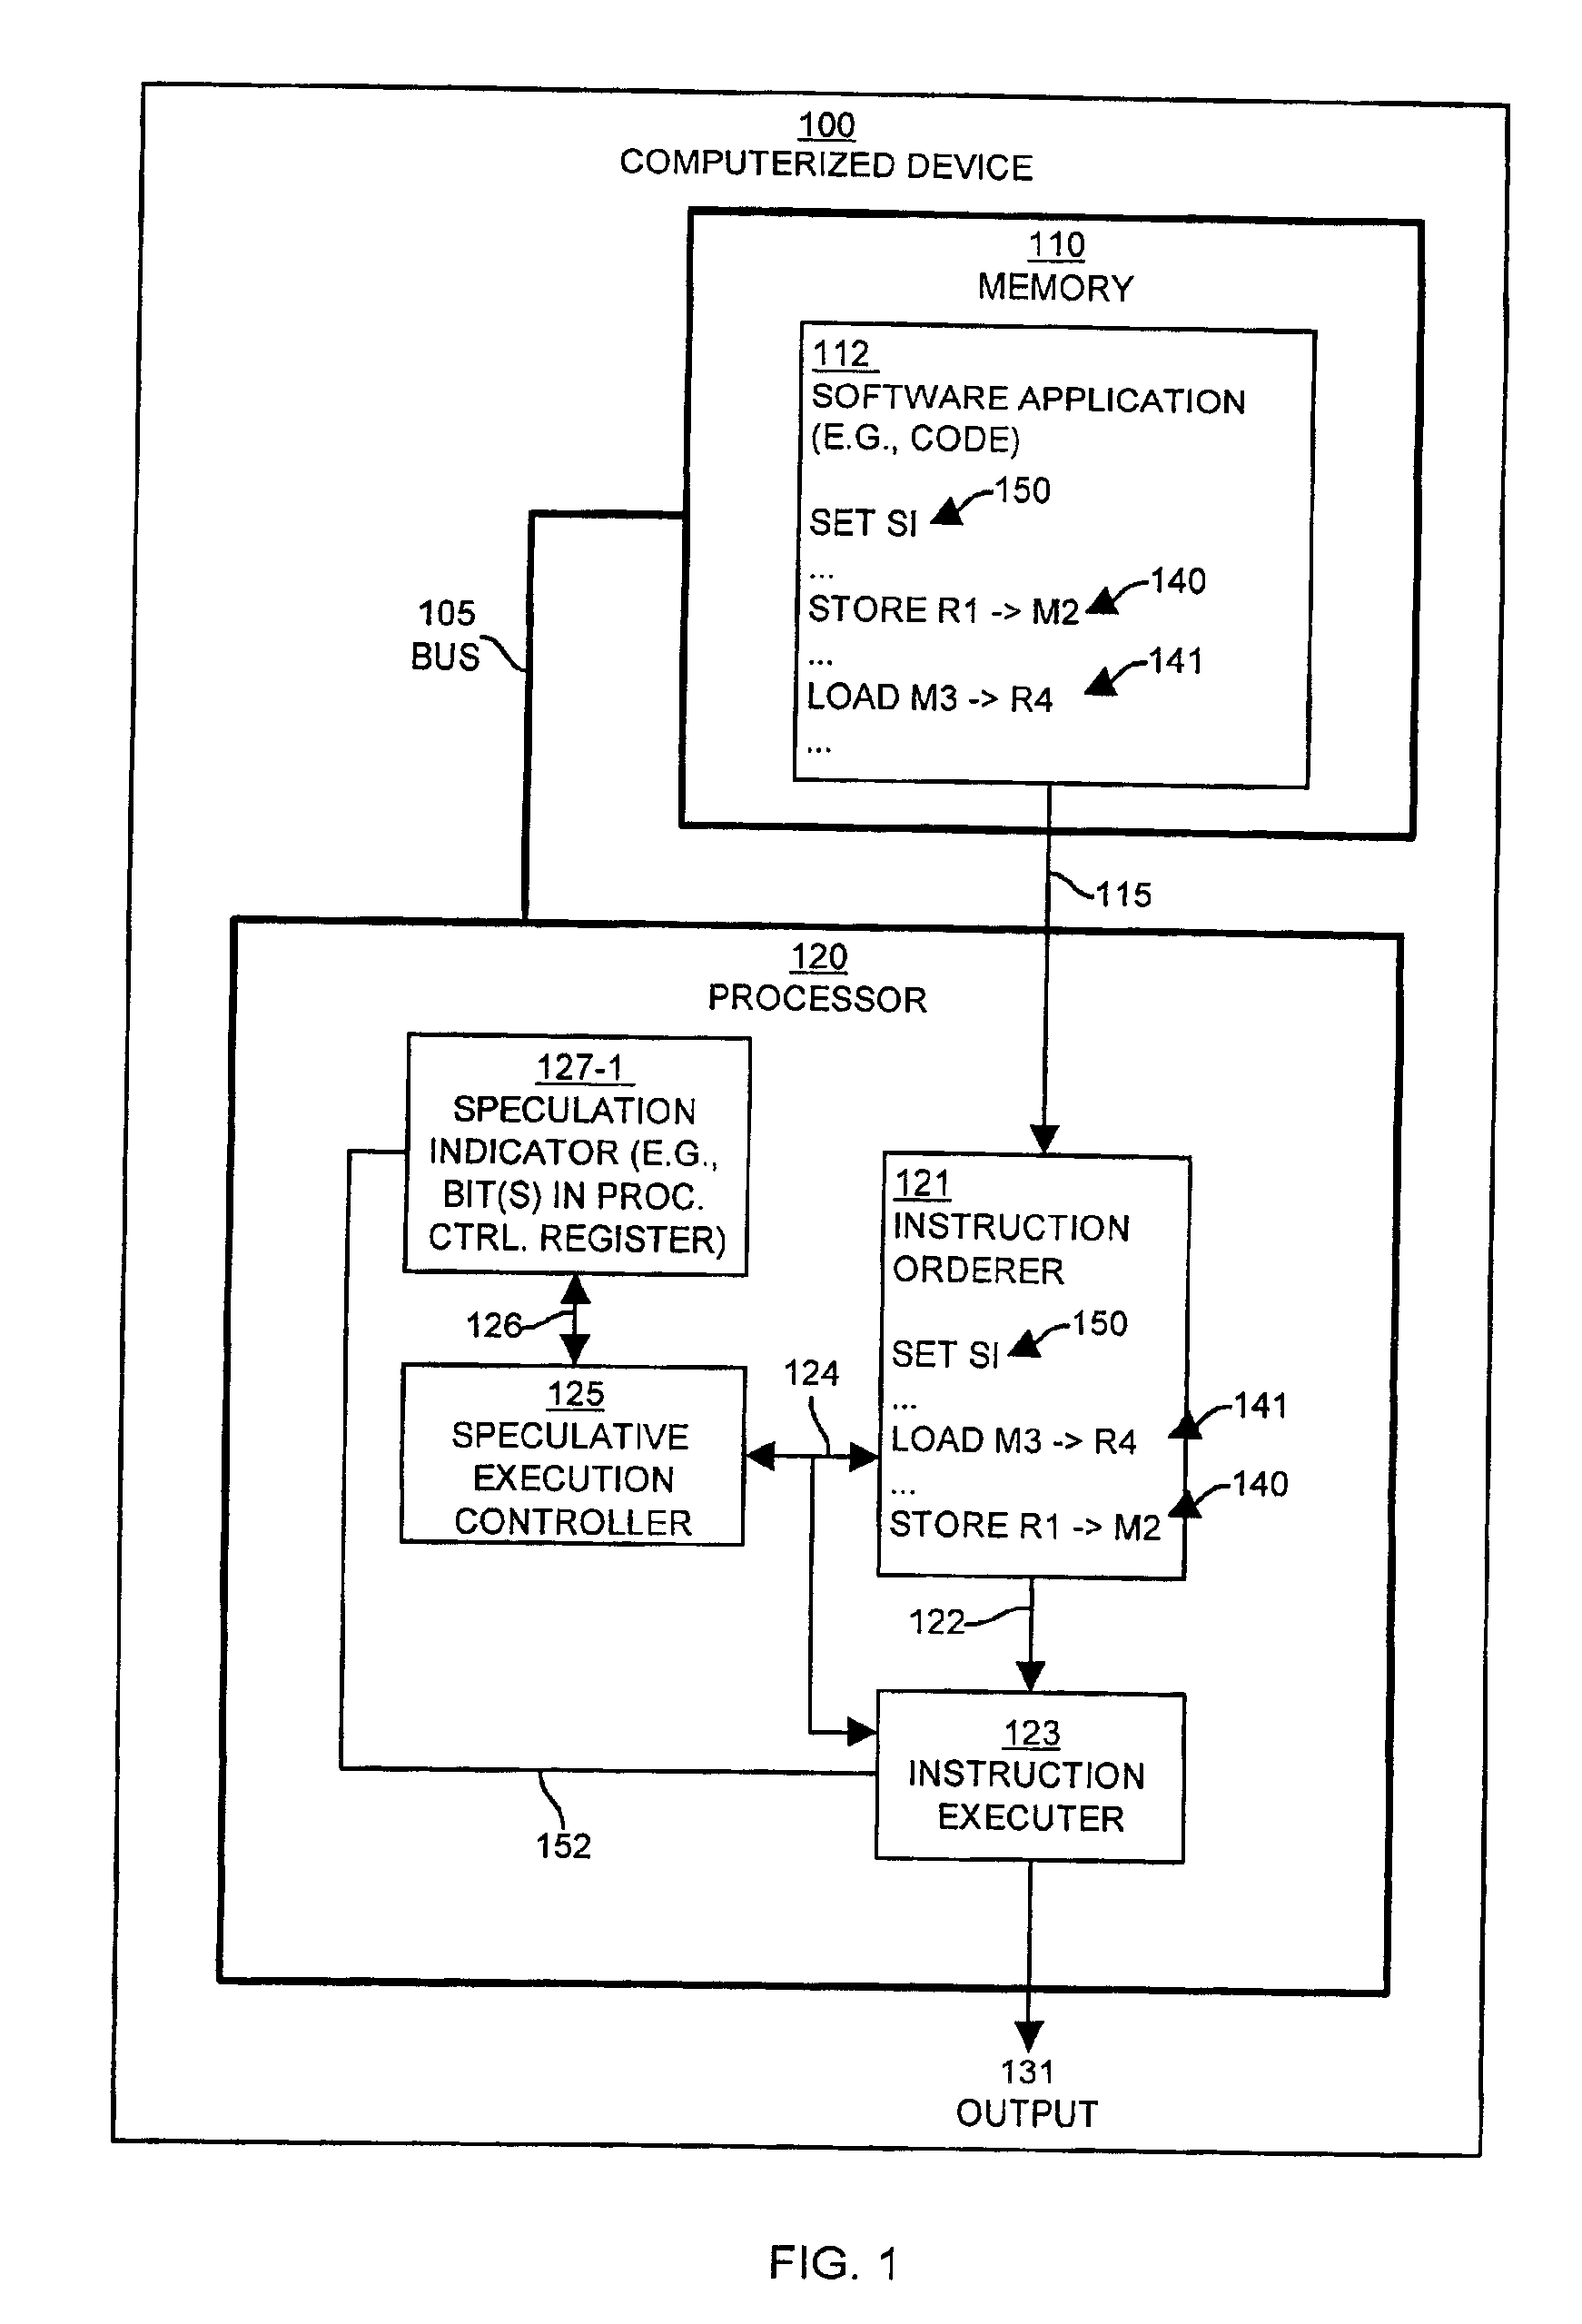 Speculative execution control with programmable indicator and deactivation of multiaccess recovery mechanism